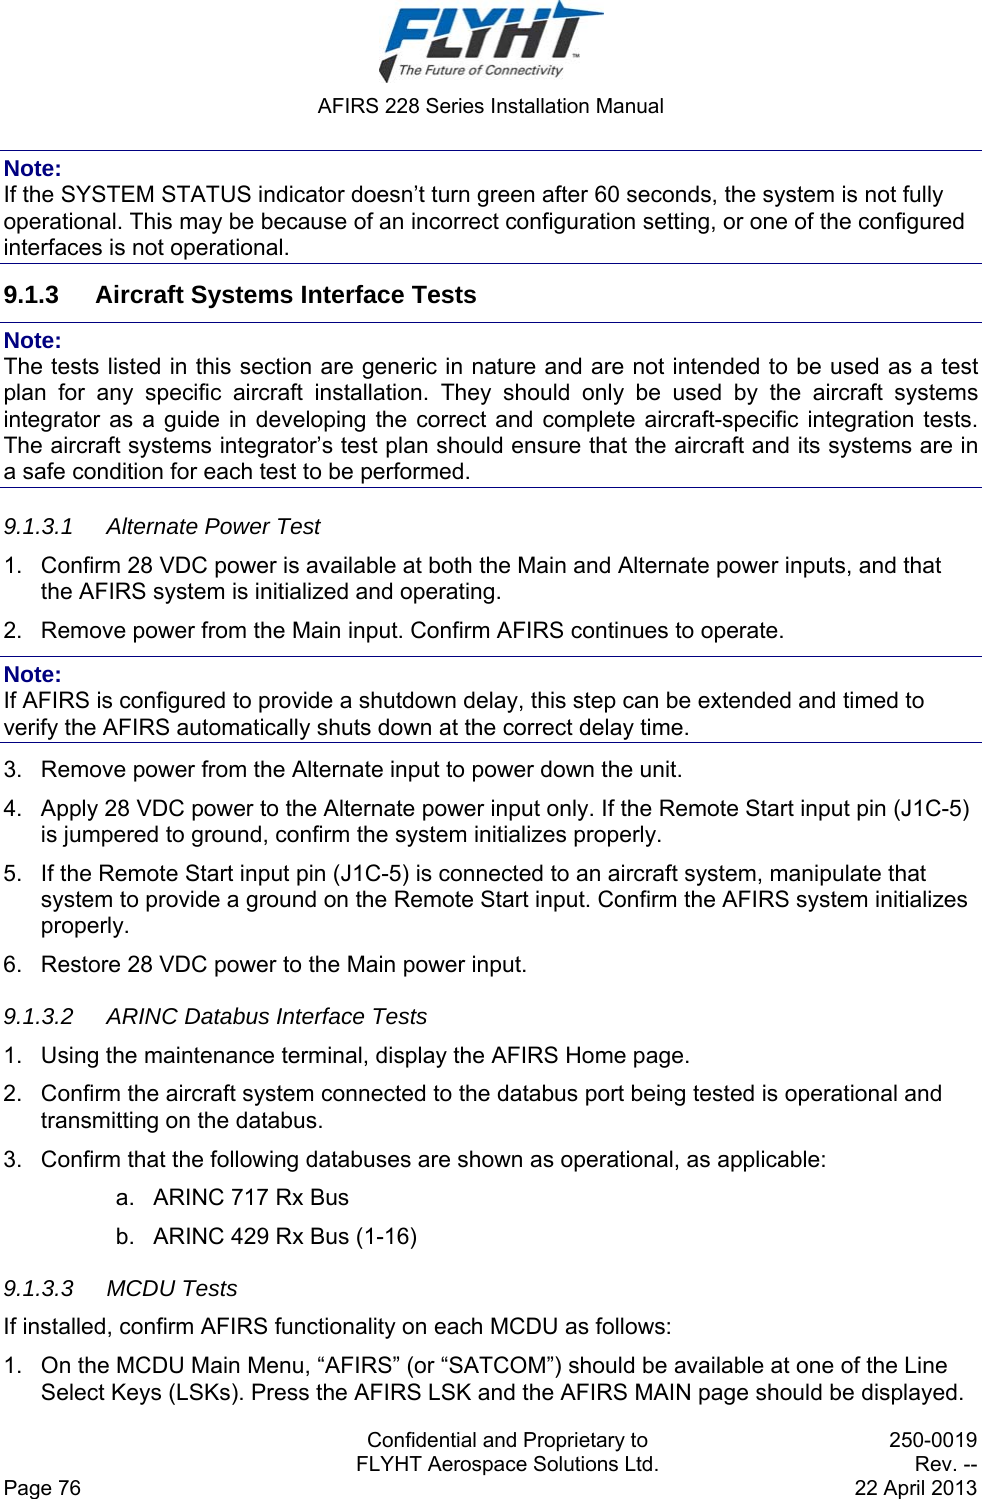  AFIRS 228 Series Installation Manual   Confidential and Proprietary to  250-0019   FLYHT Aerospace Solutions Ltd.  Rev. -- Page 76    22 April 2013 Note: If the SYSTEM STATUS indicator doesn’t turn green after 60 seconds, the system is not fully operational. This may be because of an incorrect configuration setting, or one of the configured interfaces is not operational. 9.1.3  Aircraft Systems Interface Tests Note: The tests listed in this section are generic in nature and are not intended to be used as a test plan for any specific aircraft installation. They should only be used by the aircraft systems integrator as a guide in developing the correct and complete aircraft-specific integration tests. The aircraft systems integrator’s test plan should ensure that the aircraft and its systems are in a safe condition for each test to be performed. 9.1.3.1  Alternate Power Test 1.  Confirm 28 VDC power is available at both the Main and Alternate power inputs, and that the AFIRS system is initialized and operating. 2.  Remove power from the Main input. Confirm AFIRS continues to operate. Note: If AFIRS is configured to provide a shutdown delay, this step can be extended and timed to verify the AFIRS automatically shuts down at the correct delay time. 3.  Remove power from the Alternate input to power down the unit. 4.  Apply 28 VDC power to the Alternate power input only. If the Remote Start input pin (J1C-5) is jumpered to ground, confirm the system initializes properly. 5.  If the Remote Start input pin (J1C-5) is connected to an aircraft system, manipulate that system to provide a ground on the Remote Start input. Confirm the AFIRS system initializes properly. 6.  Restore 28 VDC power to the Main power input. 9.1.3.2  ARINC Databus Interface Tests 1.  Using the maintenance terminal, display the AFIRS Home page. 2.  Confirm the aircraft system connected to the databus port being tested is operational and transmitting on the databus. 3.  Confirm that the following databuses are shown as operational, as applicable: a.  ARINC 717 Rx Bus b.  ARINC 429 Rx Bus (1-16) 9.1.3.3 MCDU Tests If installed, confirm AFIRS functionality on each MCDU as follows: 1.  On the MCDU Main Menu, “AFIRS” (or “SATCOM”) should be available at one of the Line Select Keys (LSKs). Press the AFIRS LSK and the AFIRS MAIN page should be displayed. 